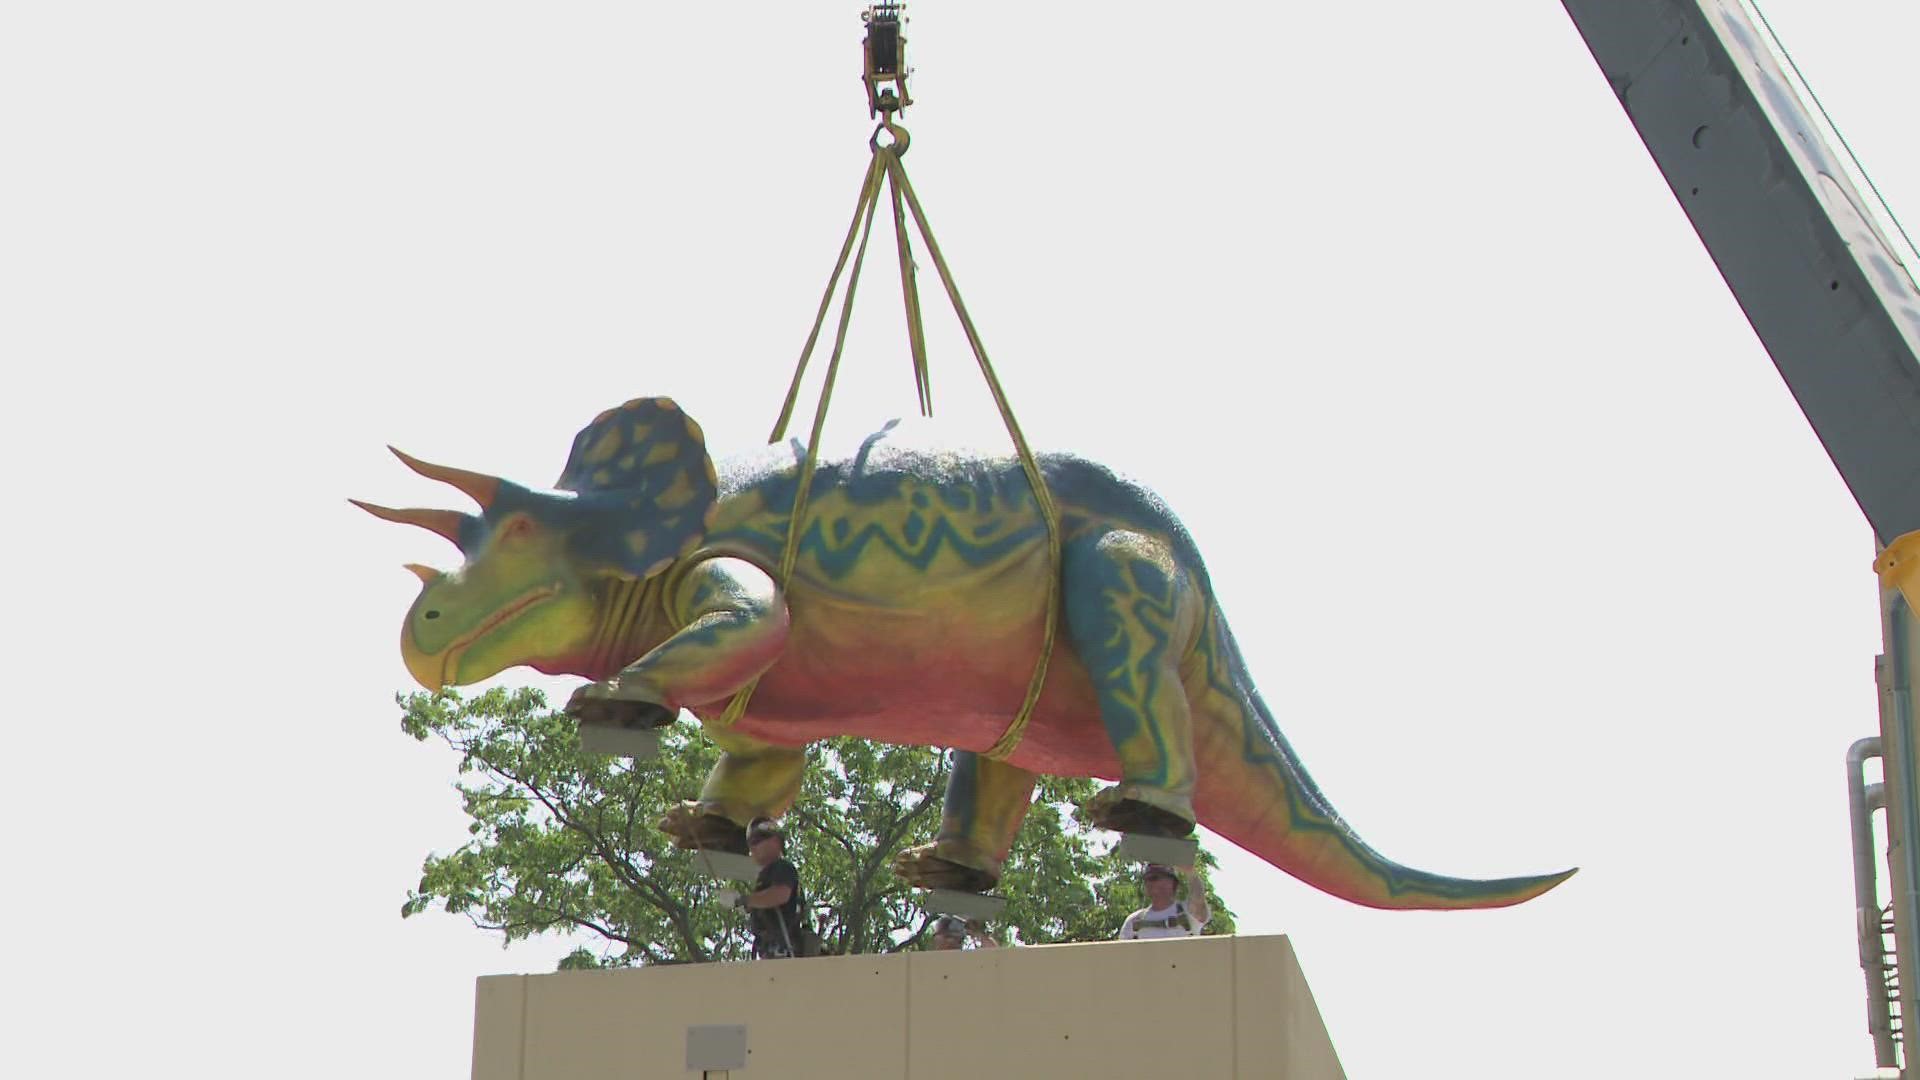 The dinosaur now sits on top of the parking lot elevator to the pedway over West Washington Street.